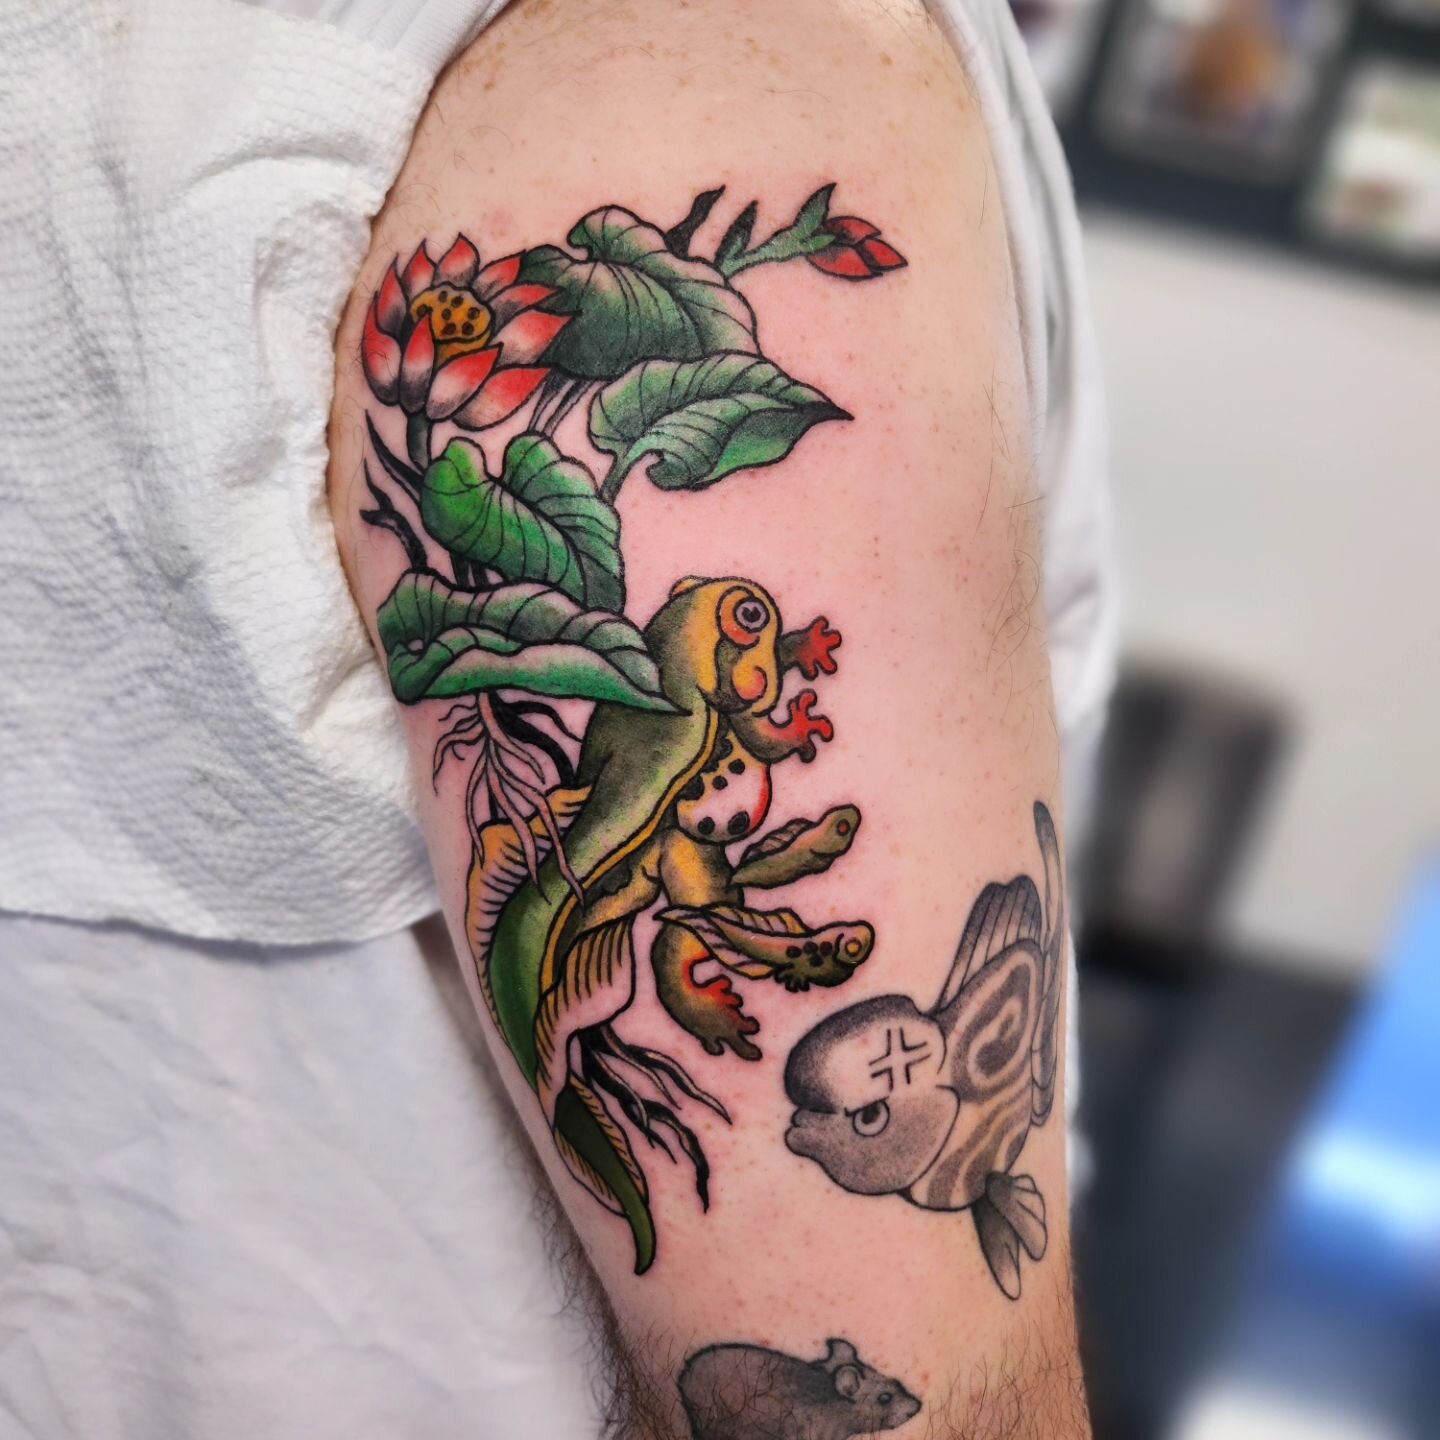 🌿 Baby Frog for Roy! 🐸 
I love getting to do more American Trad designs lately! Bring em on or walk in and pick from our book!
DM to book or questions 😊
.
.
.
.
.
.
#americantraditionaltattoo #americantraditional #americantraditionalflash #tattoo 